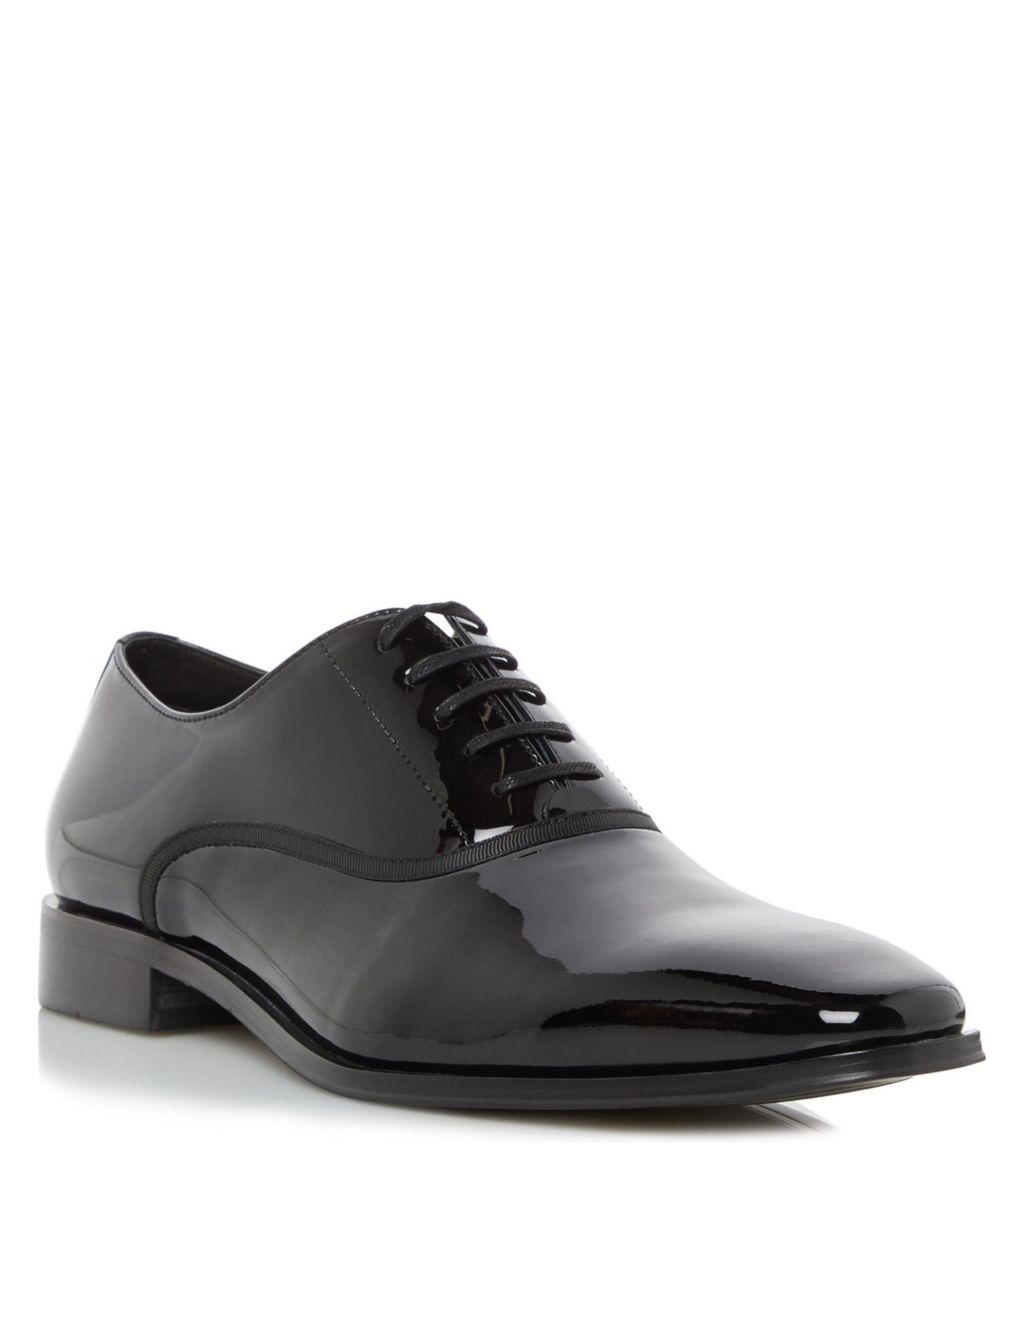 Buy Patent Leather Oxford Shoes | Dune London | M&S